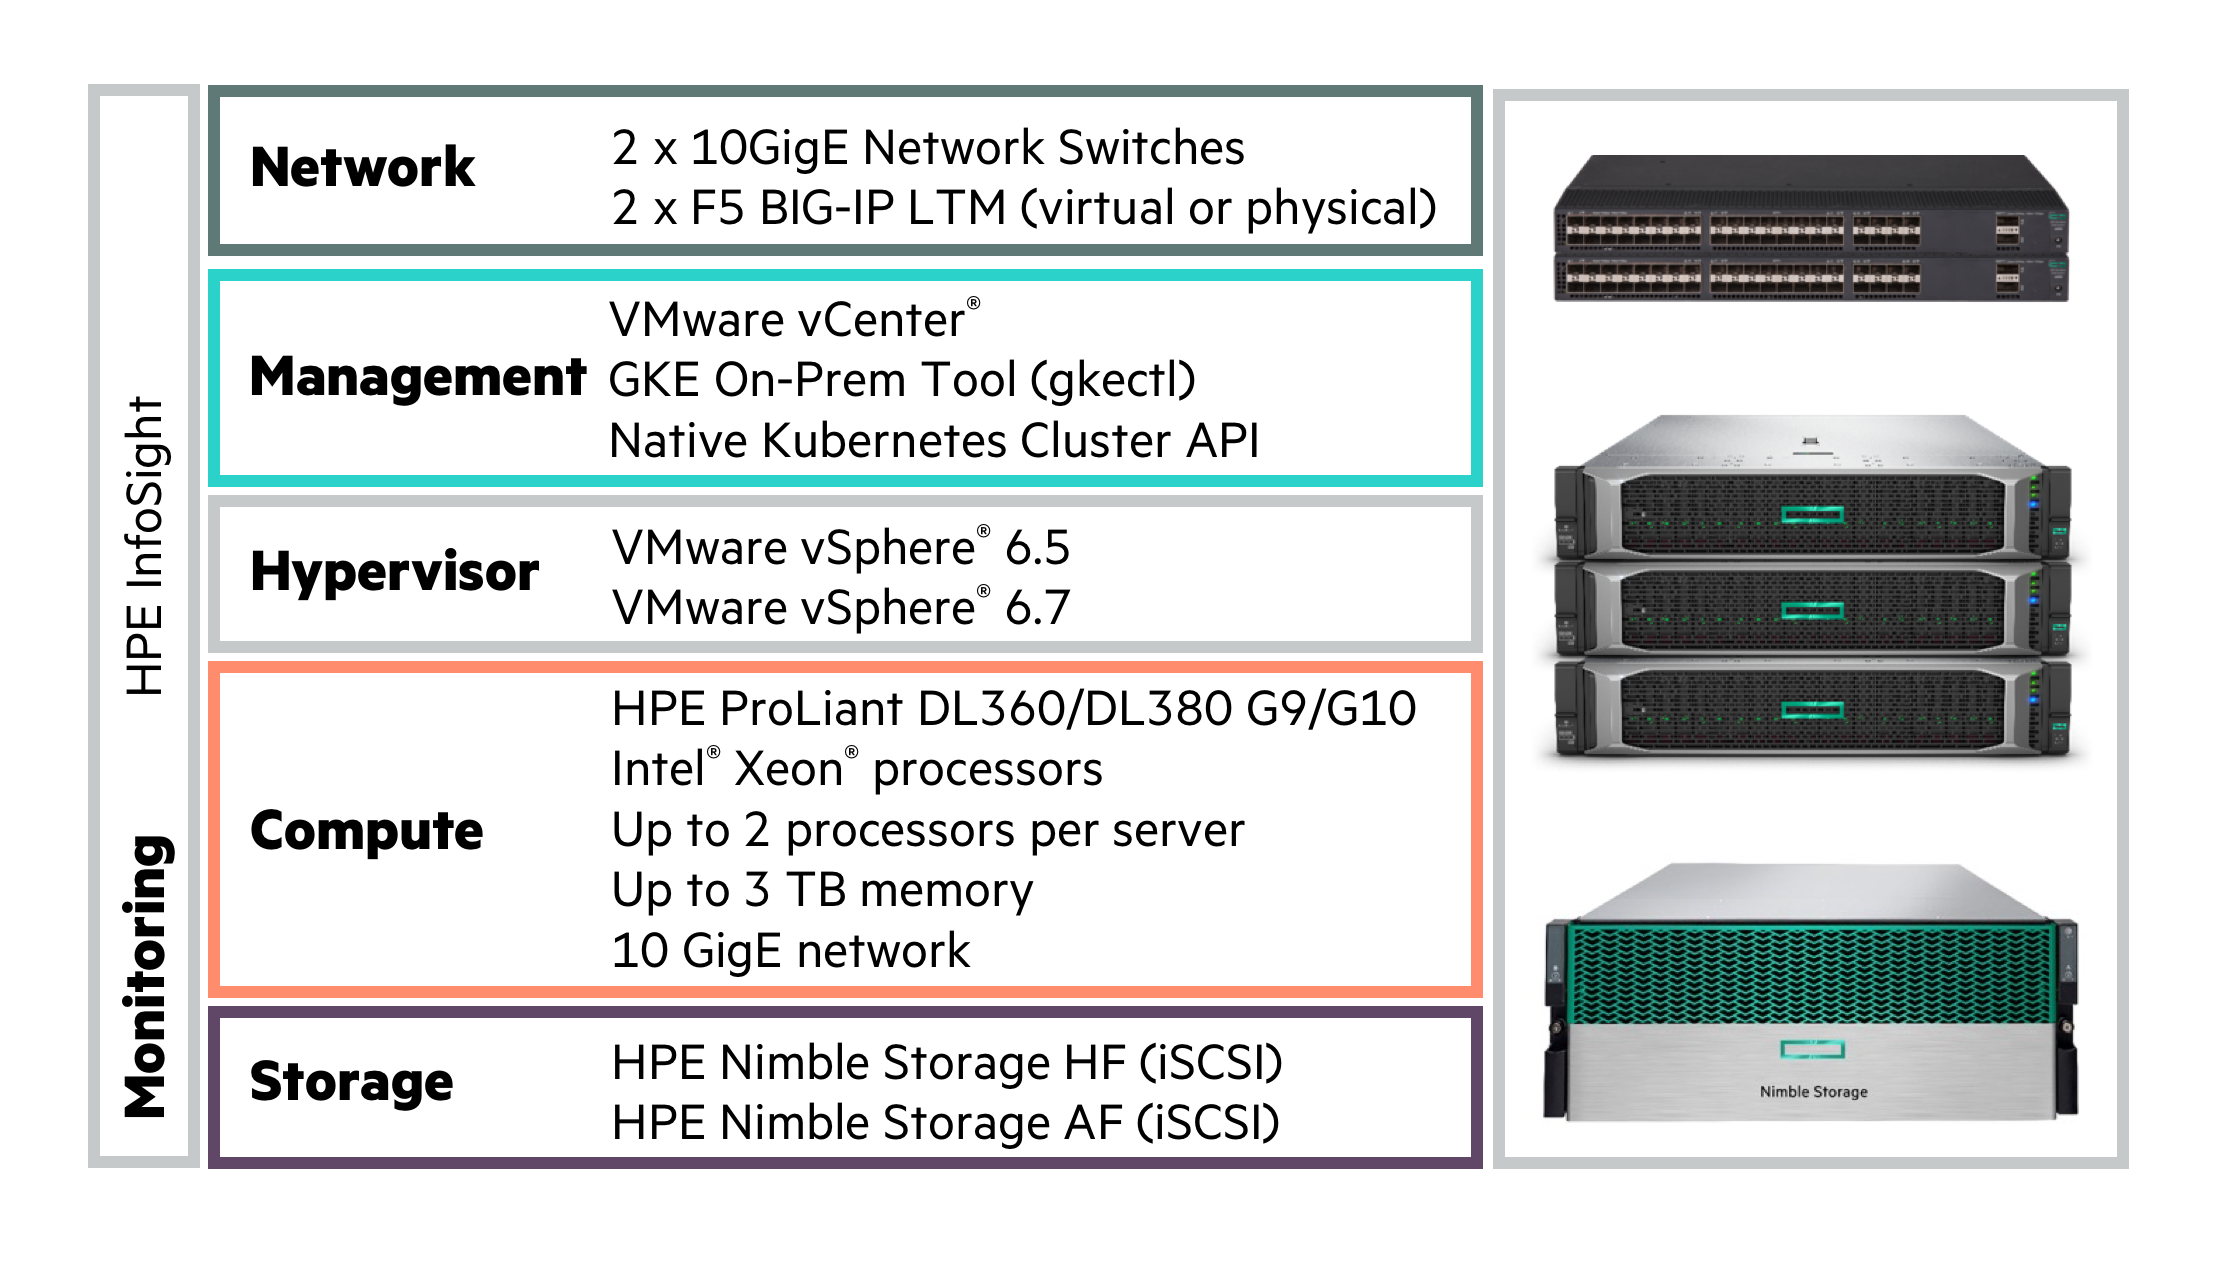 Converged GKE On-Prem solution from HPE